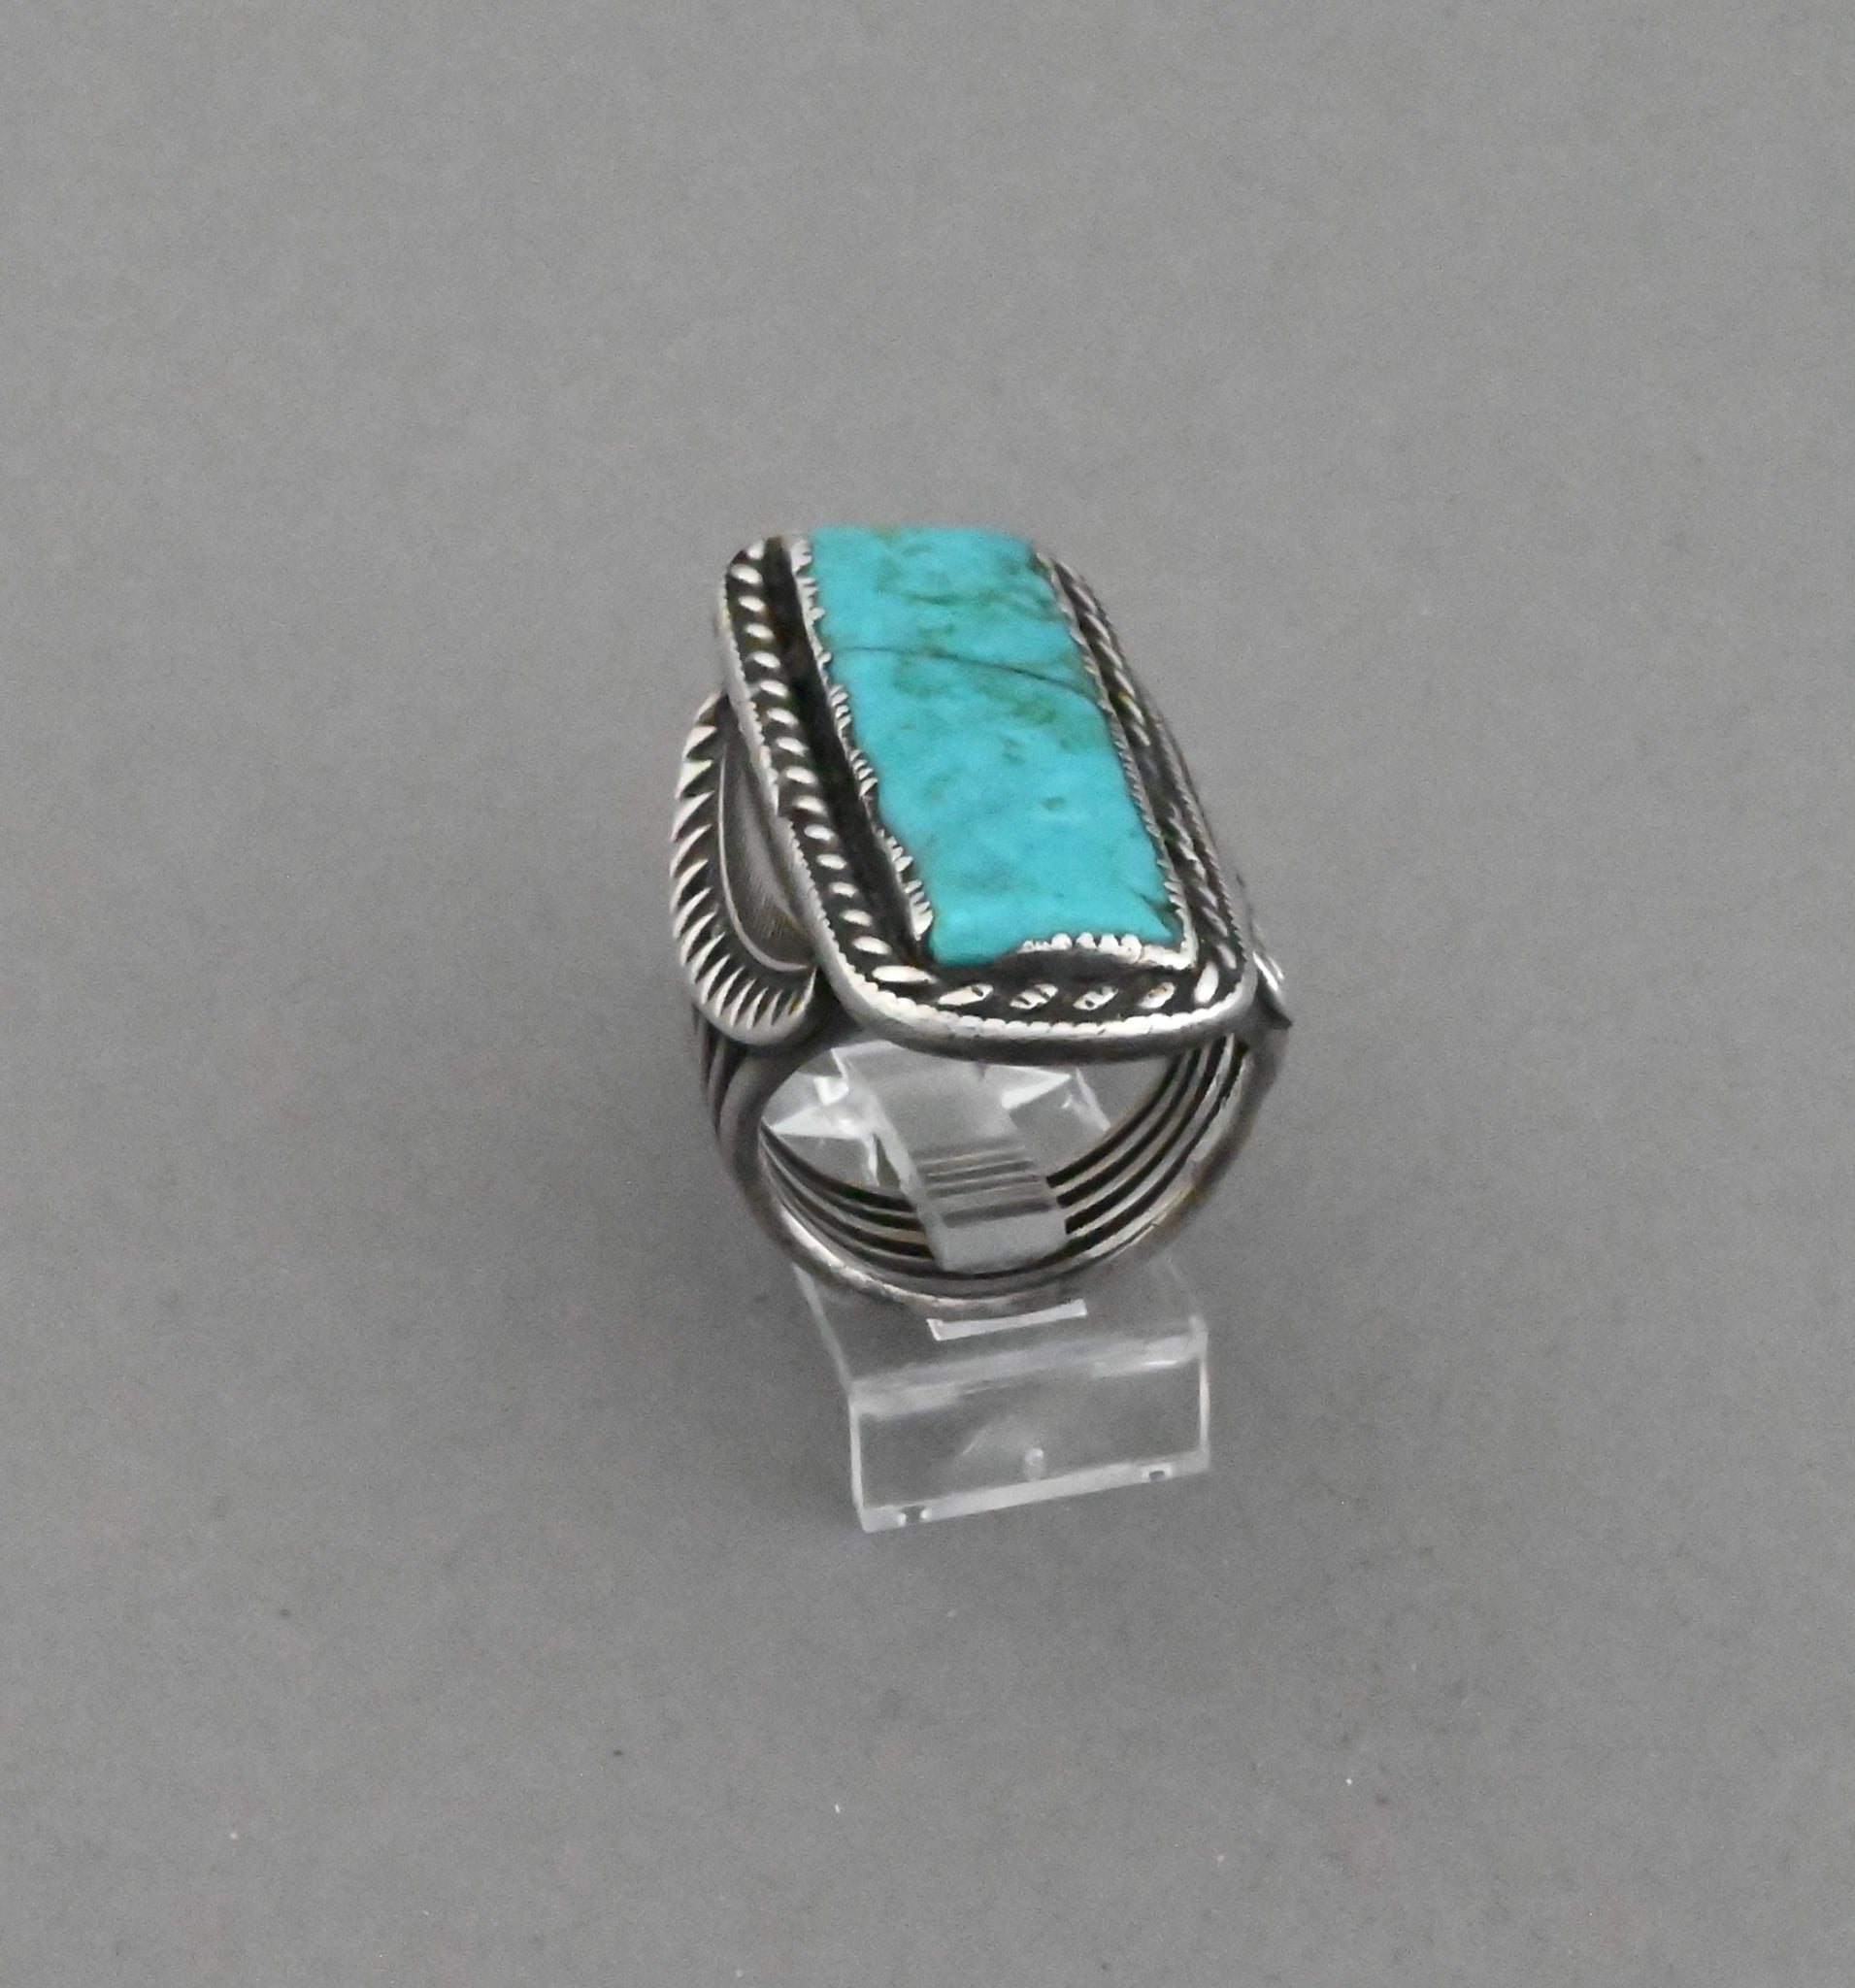 Ring with Blue Gem Turquoise (Navajo)